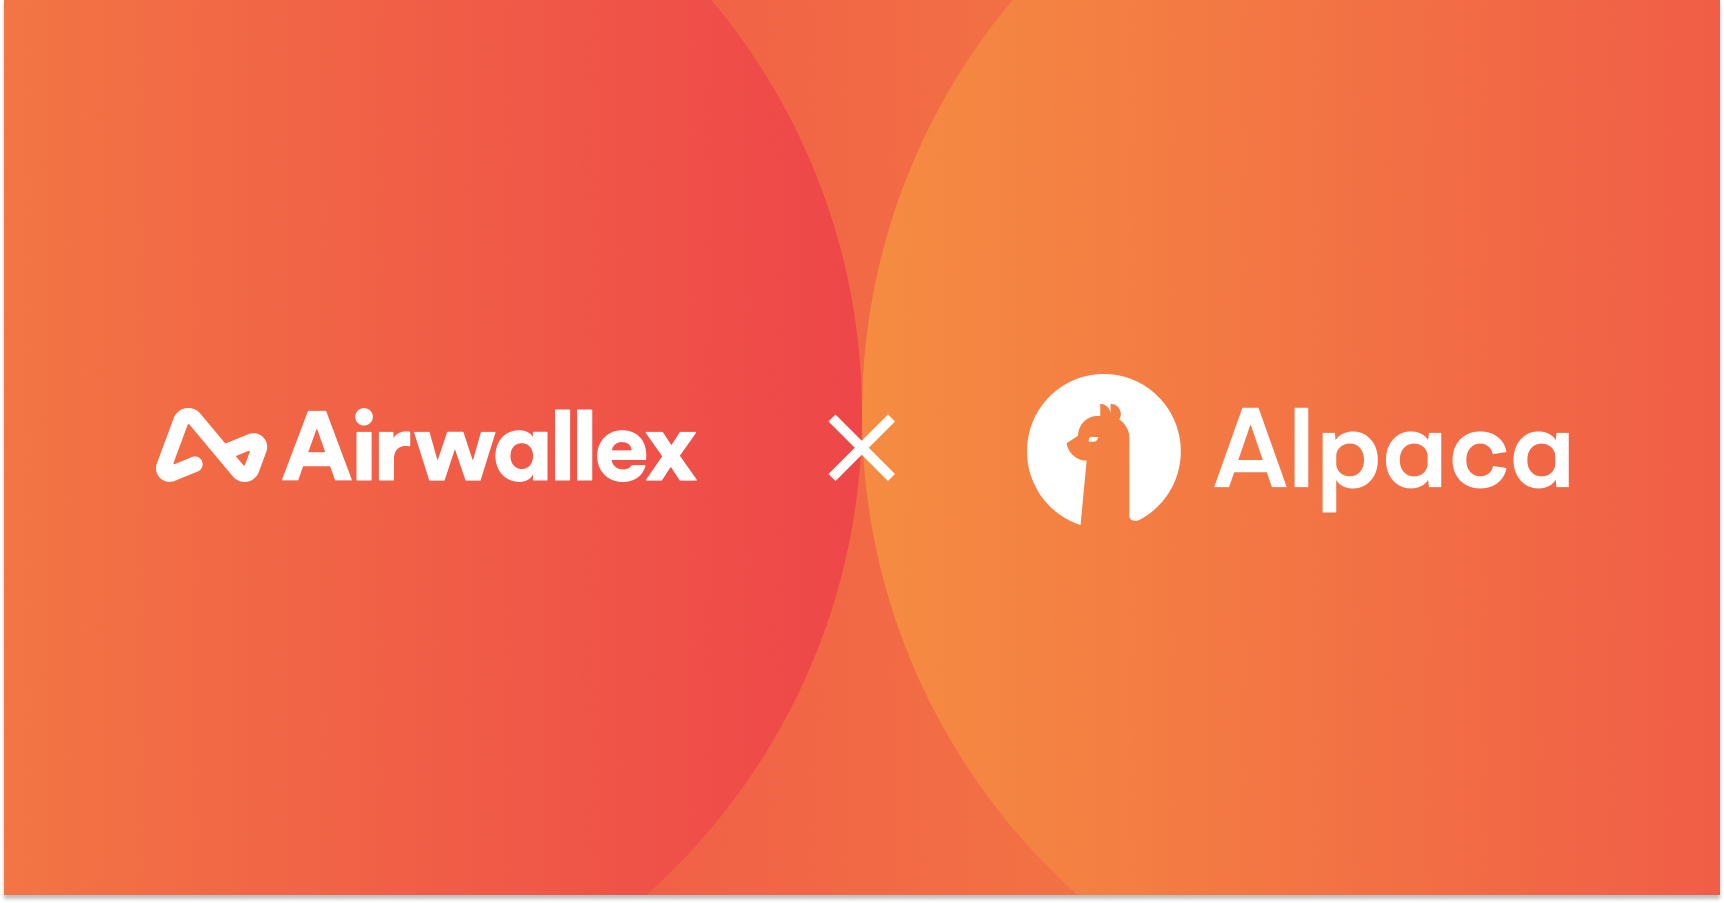 Airwallex and Alpaca partner to deliver cost-efficient experience for global investors purchasing U.S. stocks